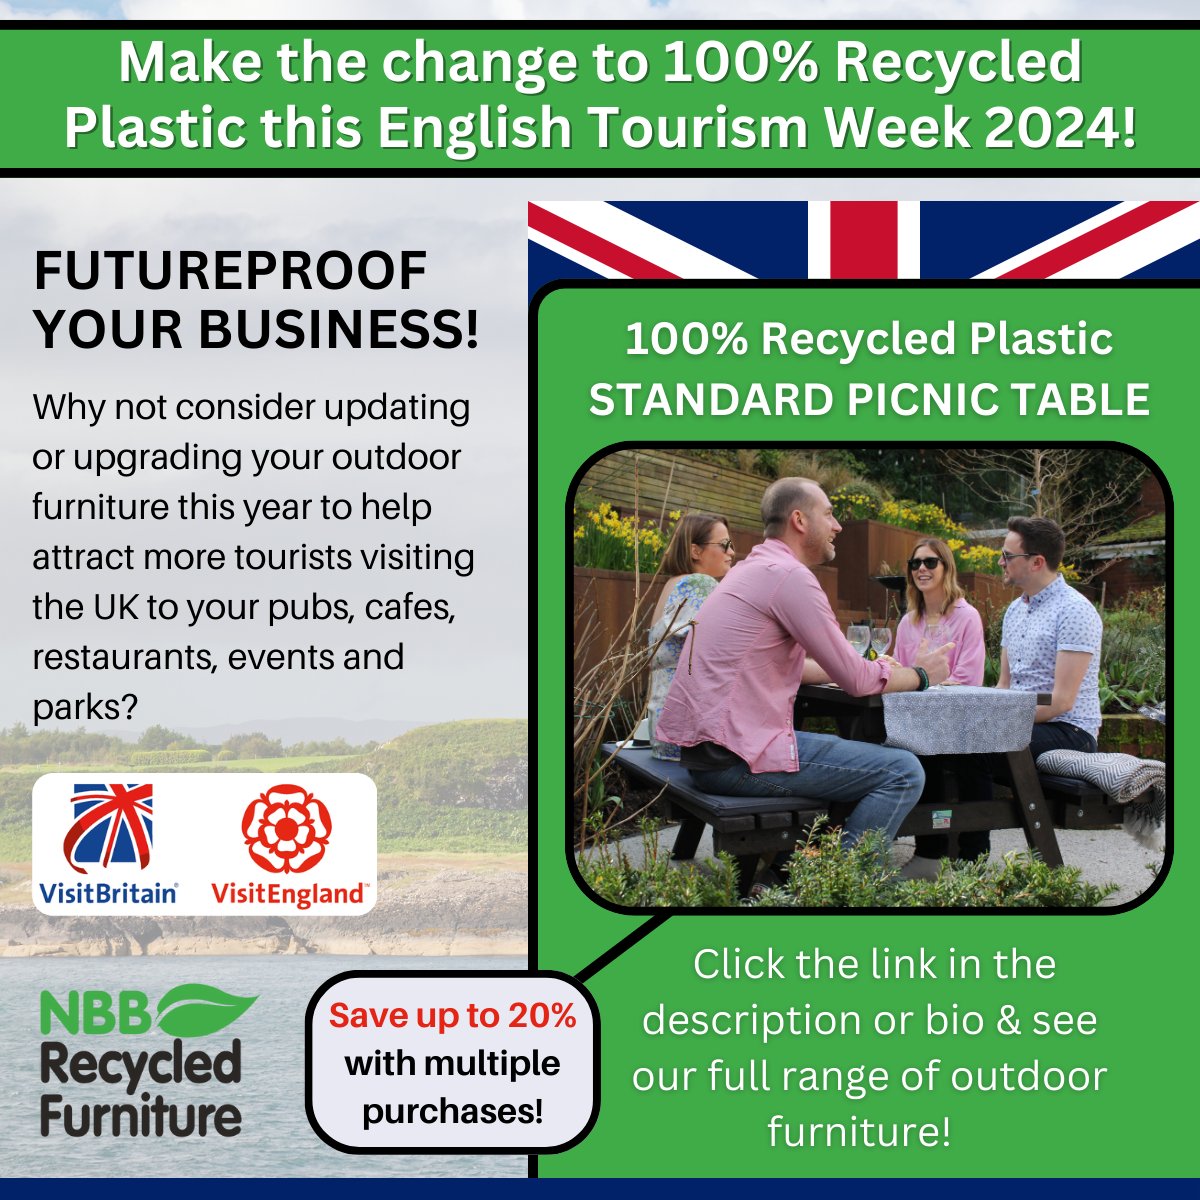 Stand out as a proud British business by supporting English Tourism Week starting today from the 15th to the 24th of March! Browse our outdoor furniture by clicking this link: bit.ly/3wWzh0r #NBBRecycledFurniture #visitengland #visitbritain #EnglishTourismWeek #recycle